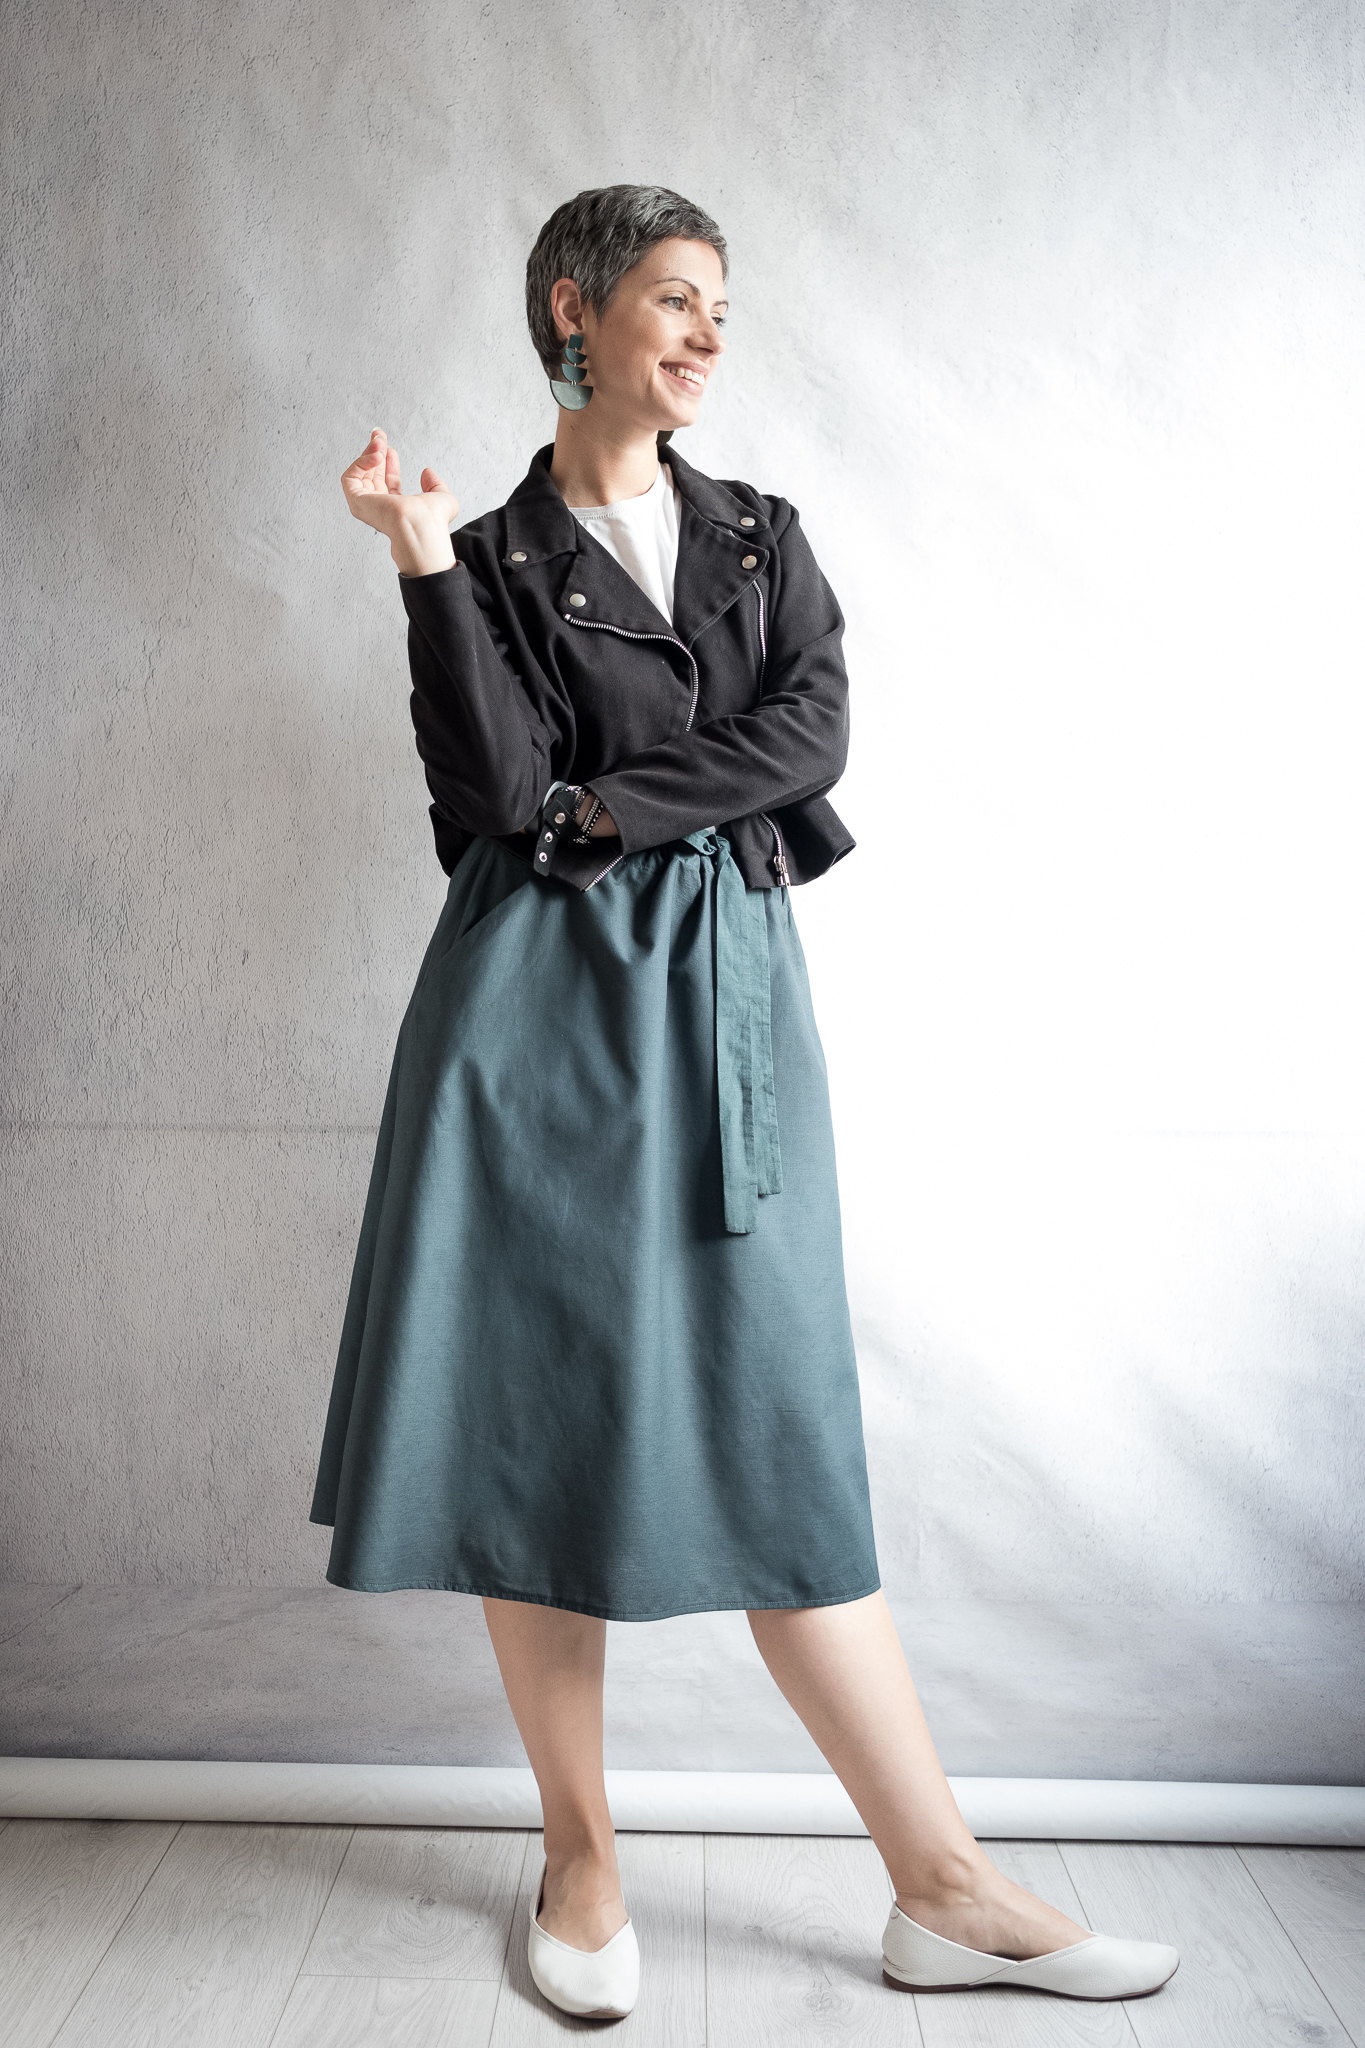 Outfit details: black denim cropped biker jacket, white fitted t-shirt, green A-line skirt with ties; white leather flats; polymer clay earrings.

Skirt made with Fibre Mood Jutta sewing pattern